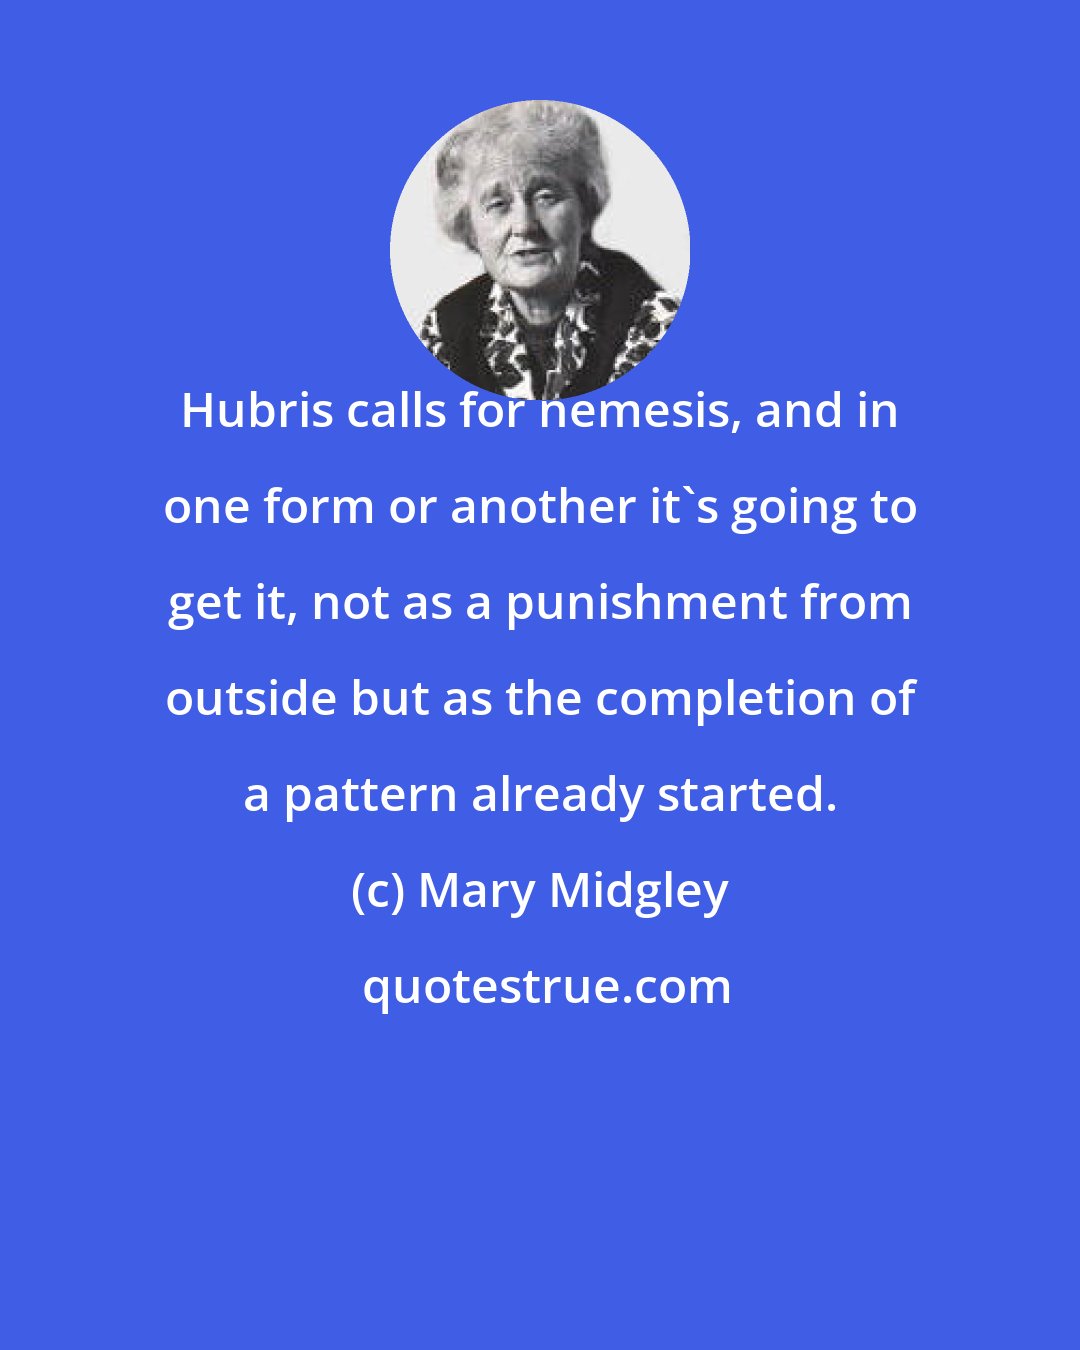 Mary Midgley: Hubris calls for nemesis, and in one form or another it's going to get it, not as a punishment from outside but as the completion of a pattern already started.